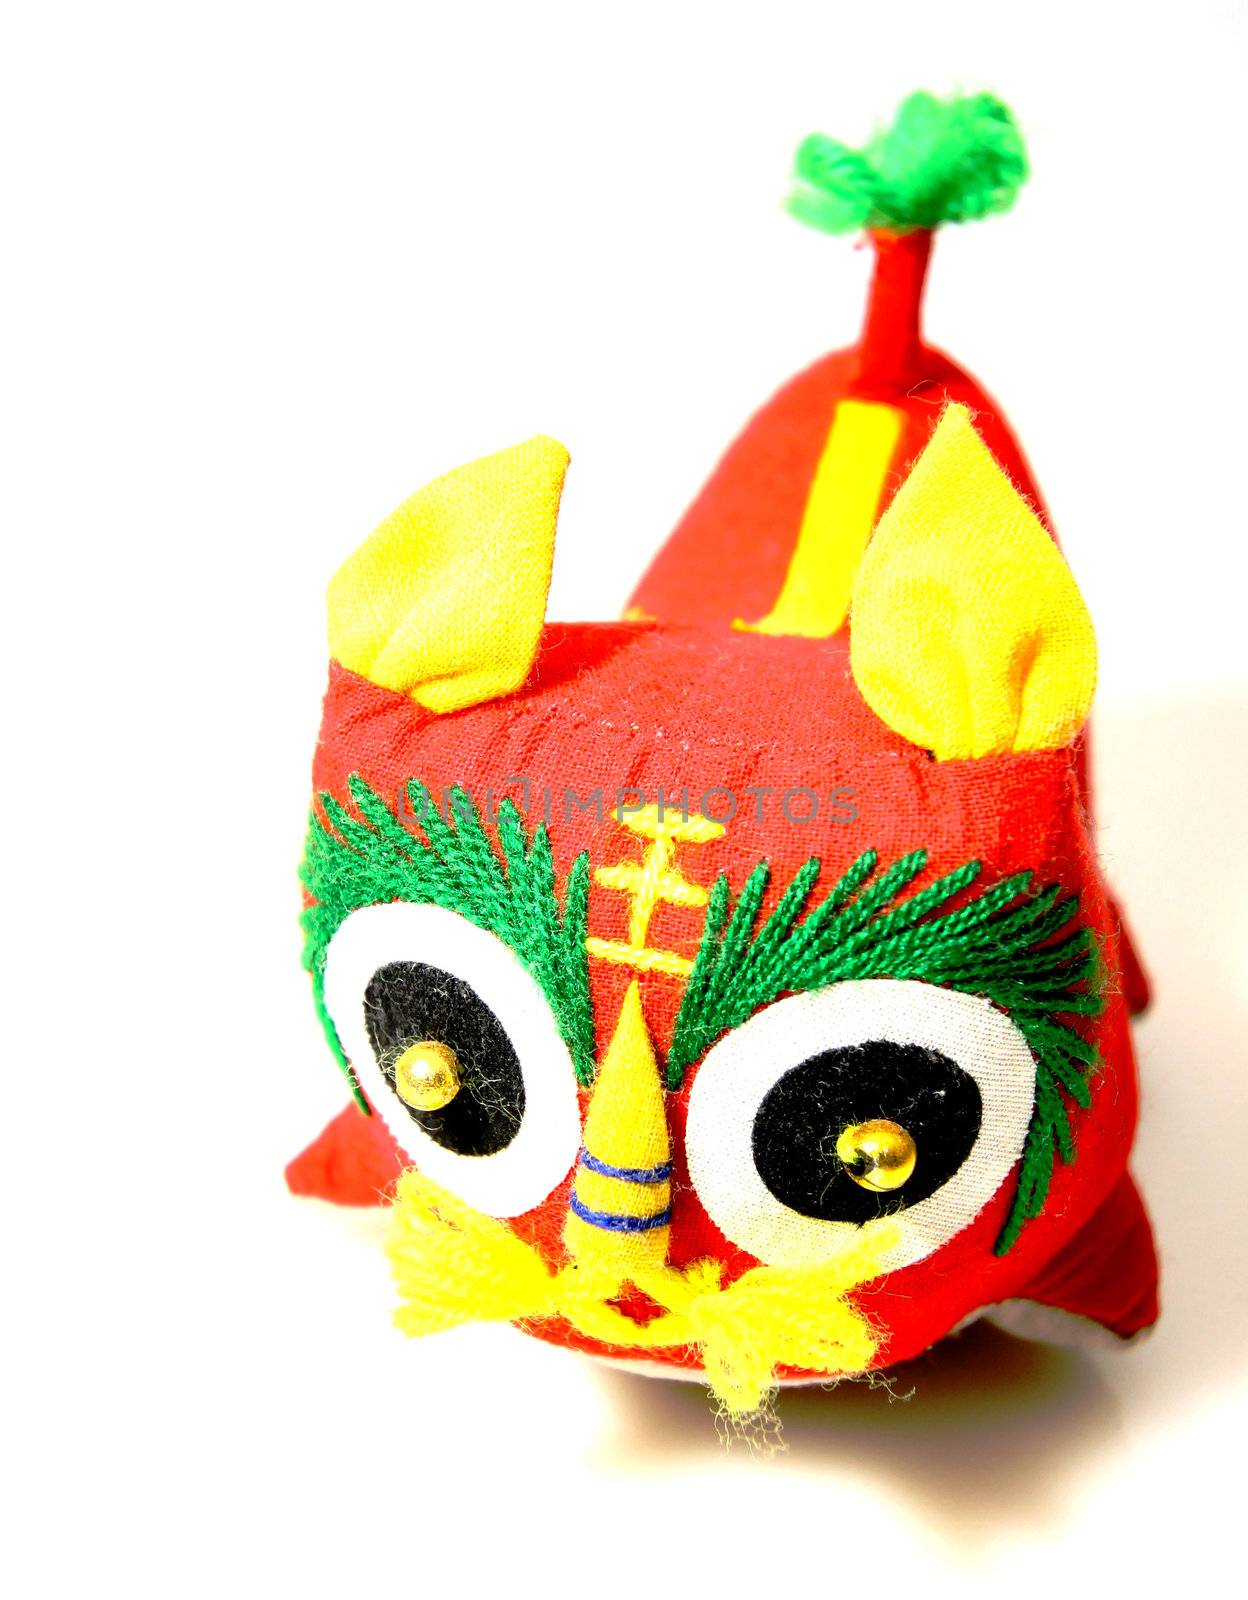 Chinese lion doll by kawing921